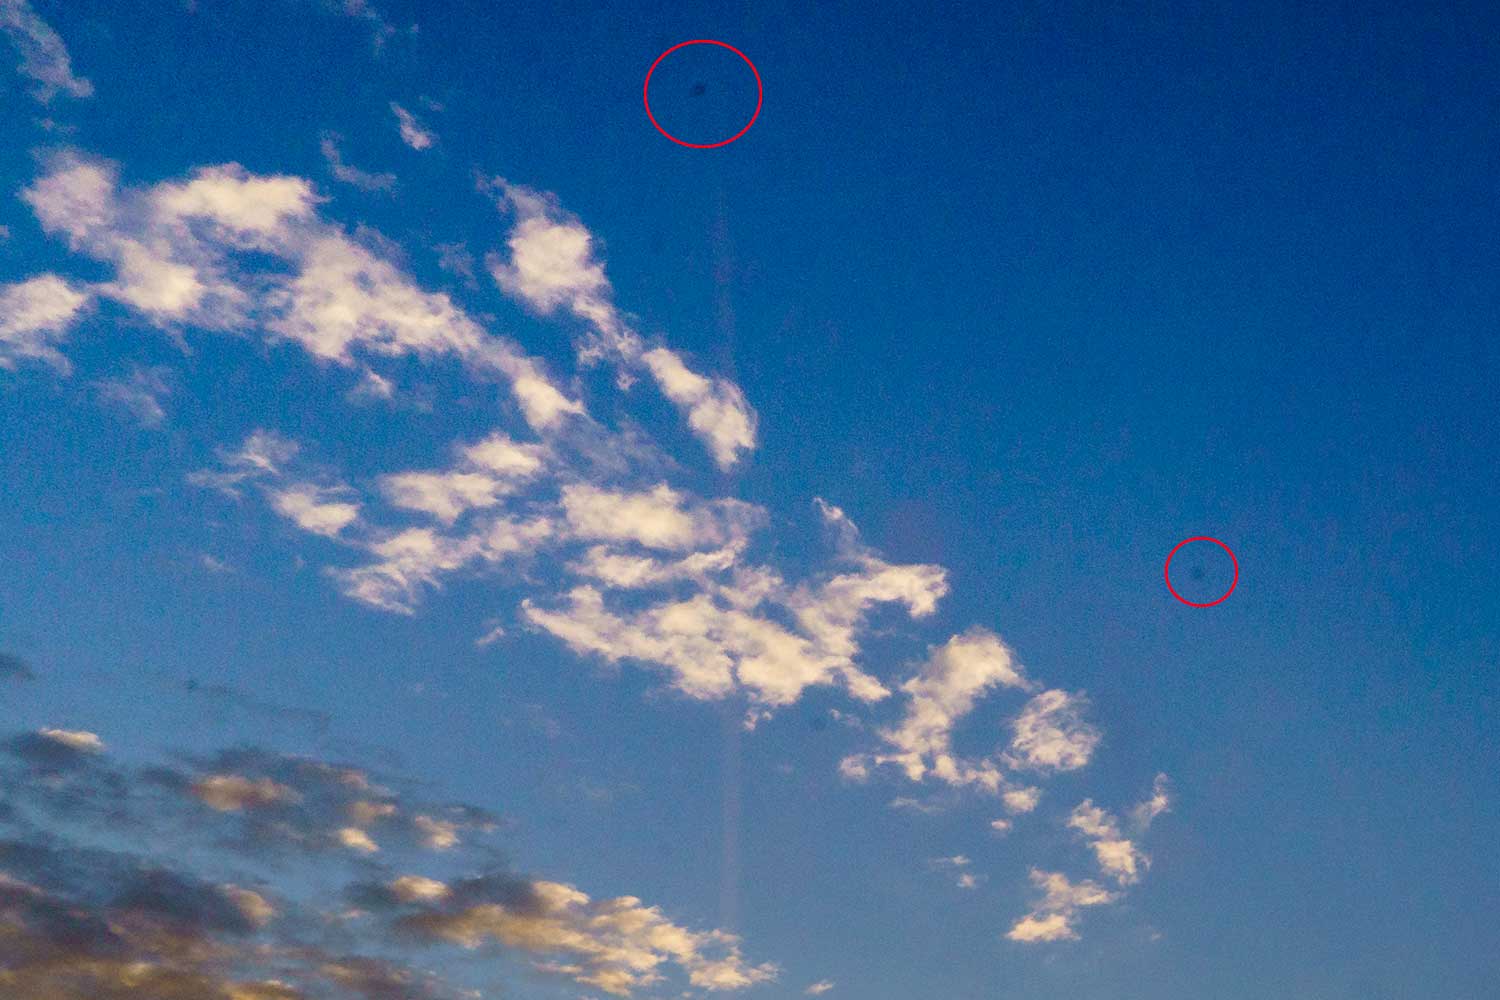 Photograph of sky showing dust on camera sensor